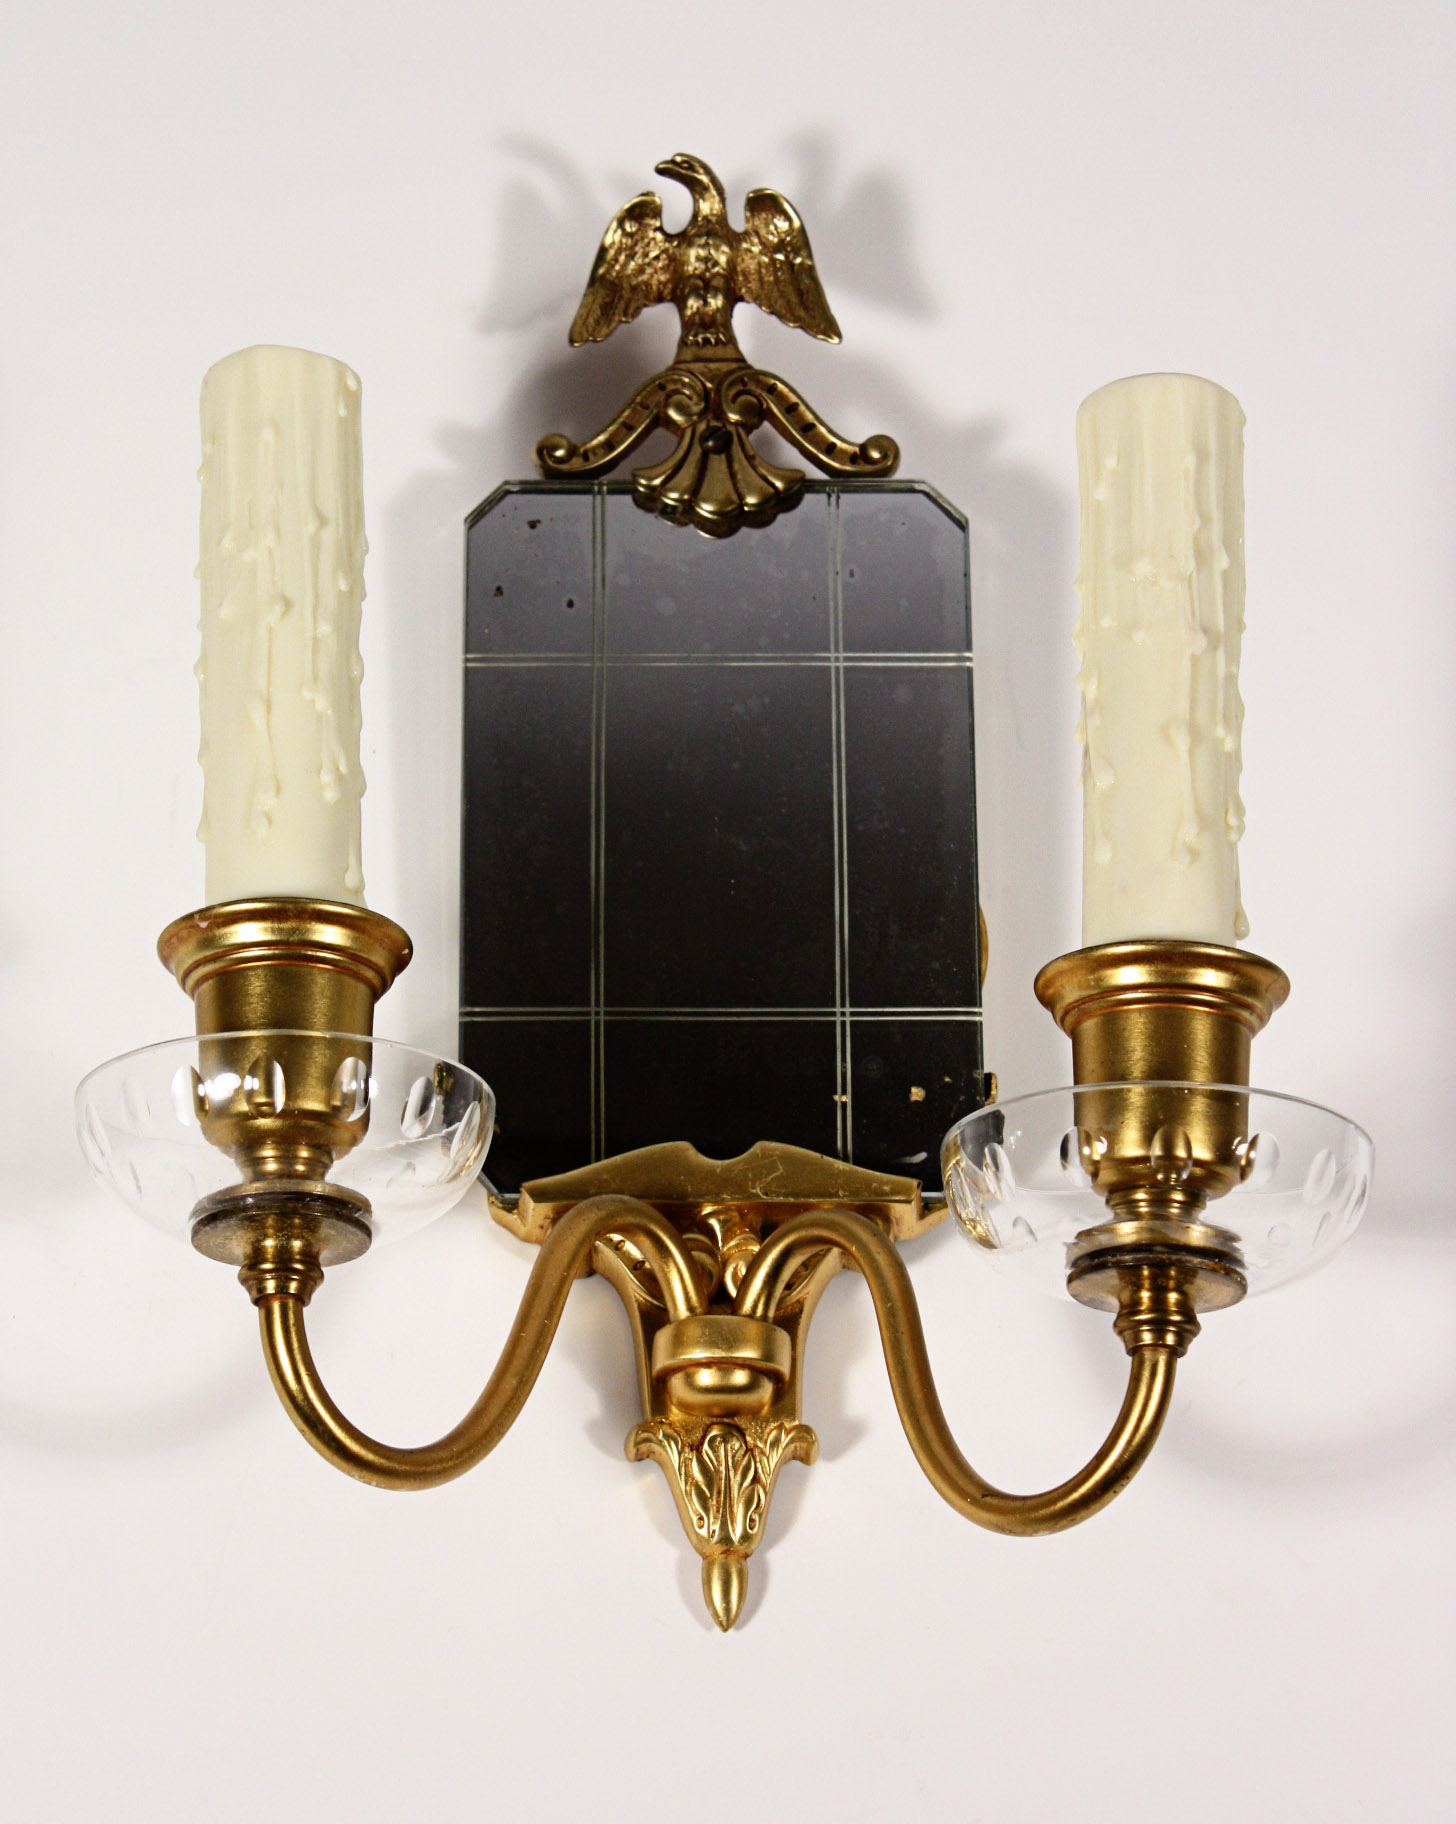 SOLD Amazing Pair of Antique Figural Gilded Bronze Mirrored Sconces, Eagle-18770